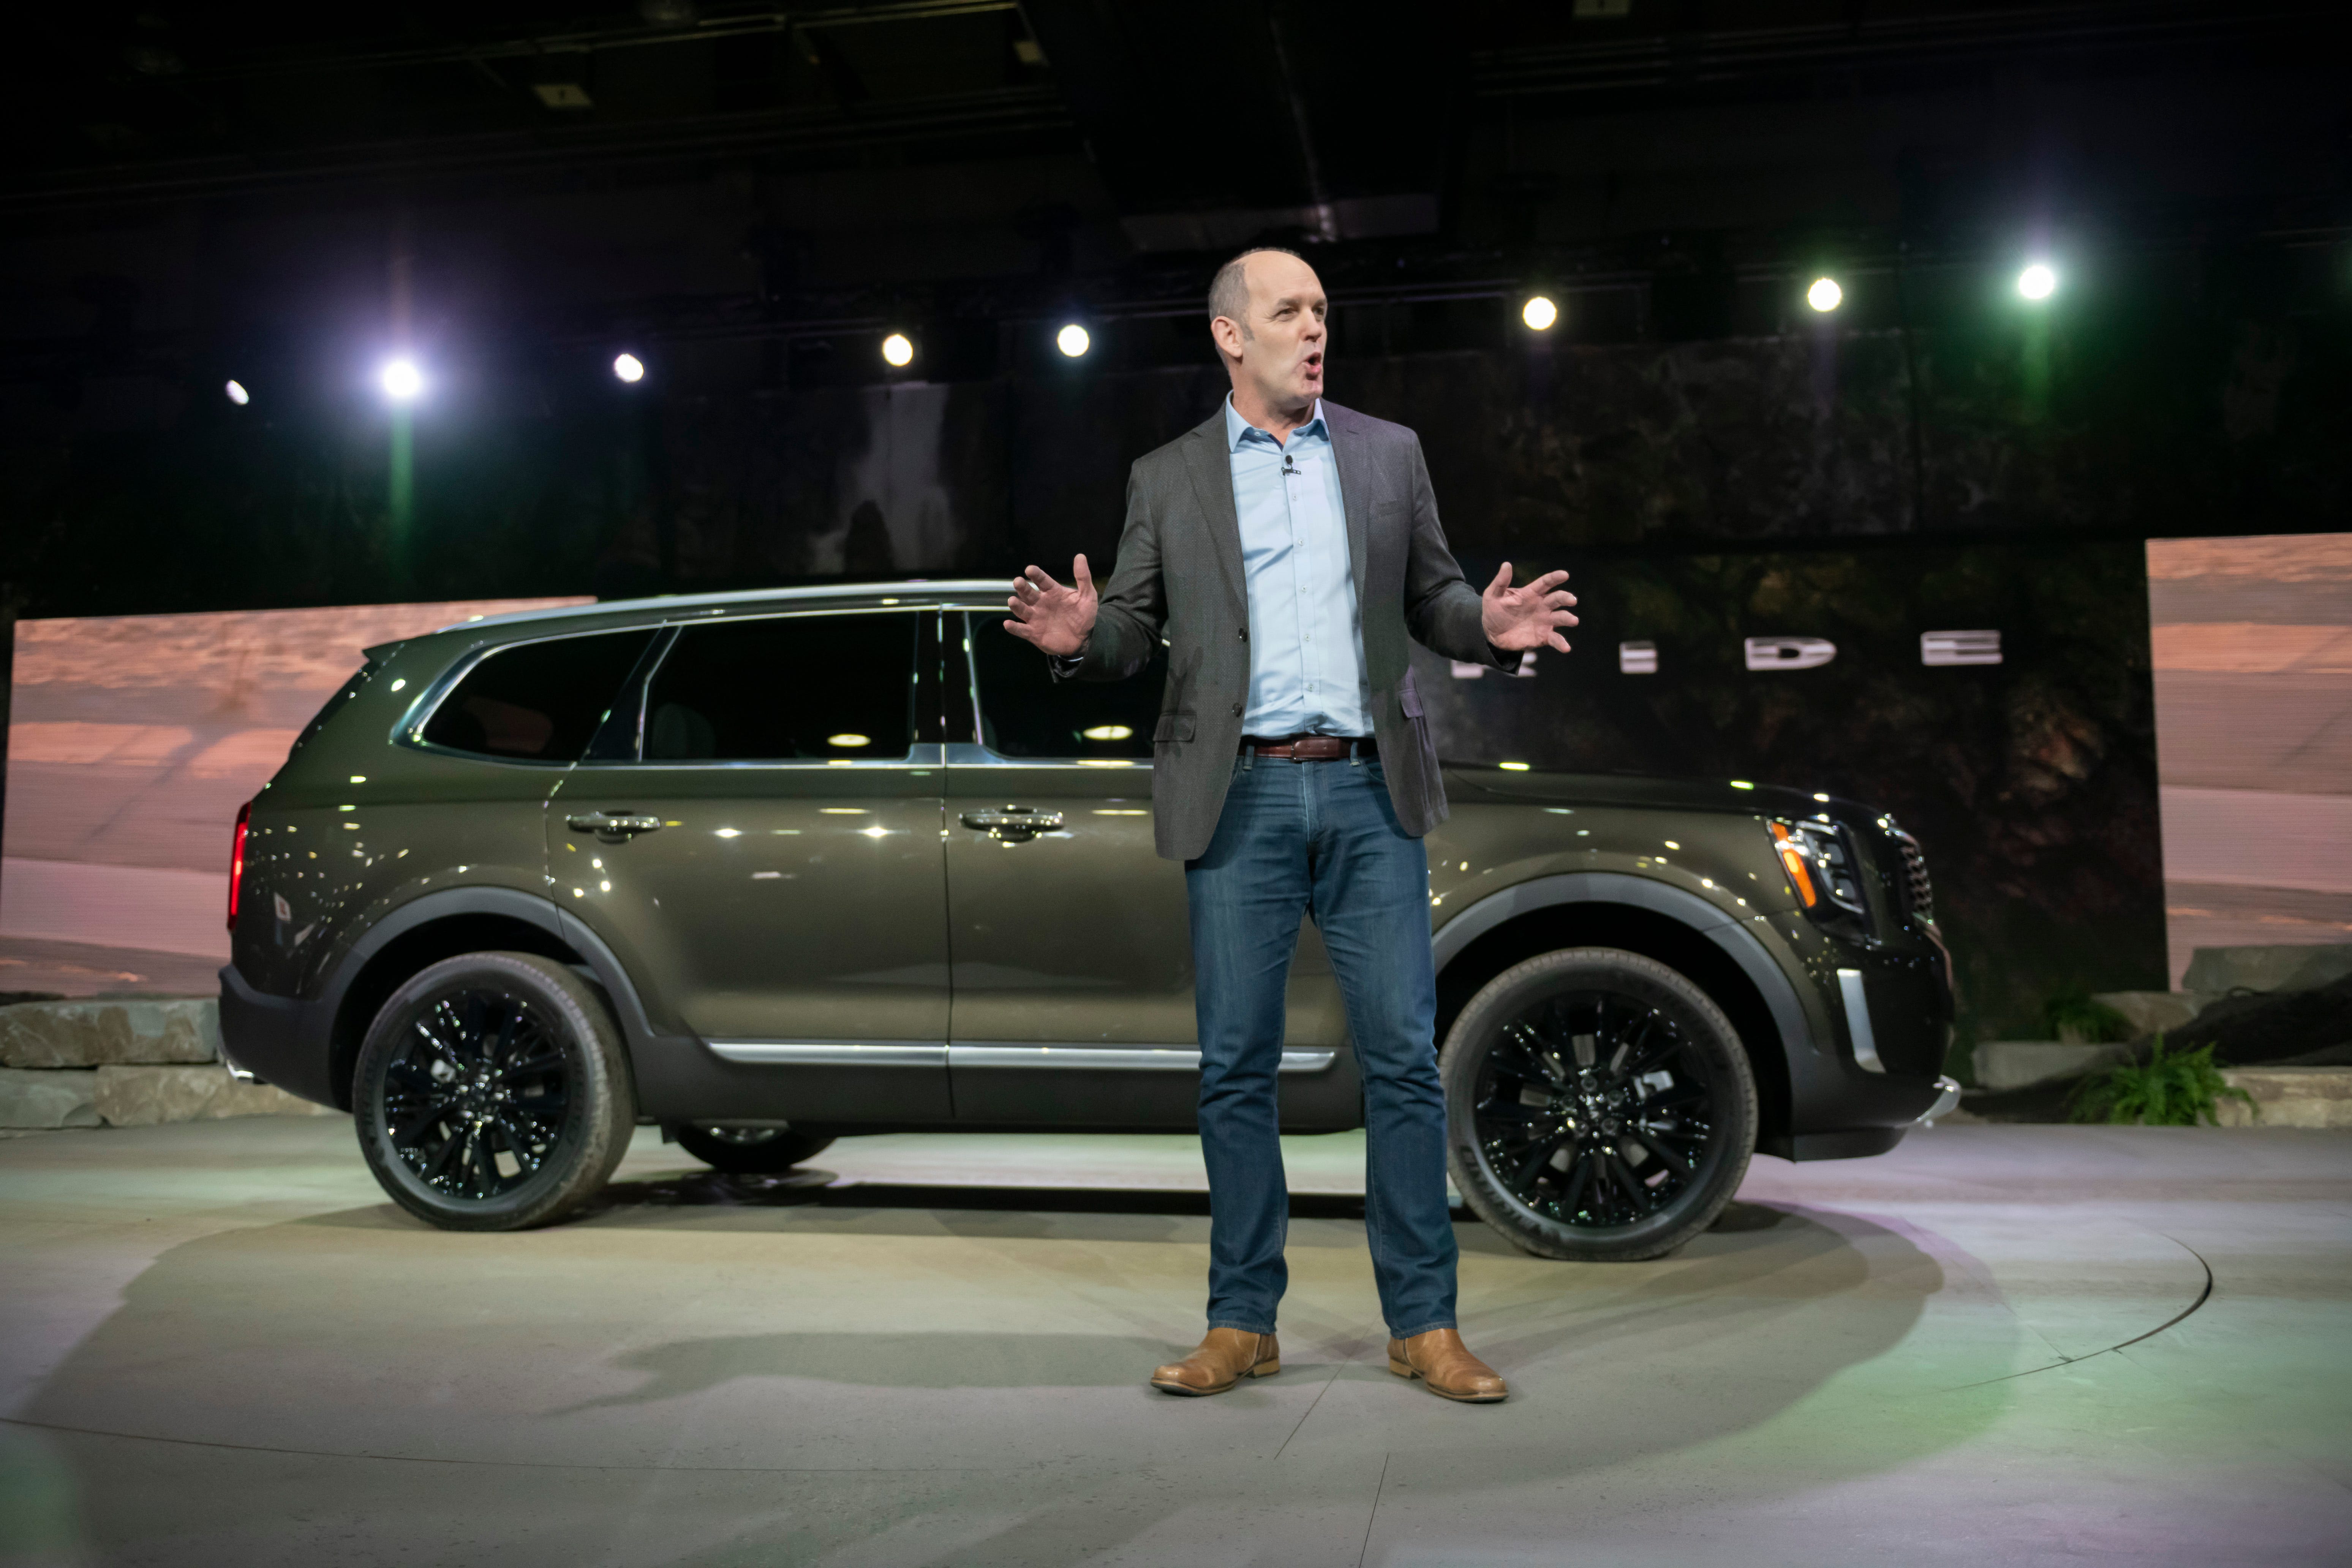 Michael Cole, chief operating officer and executive vice president at Kia Motors America, talks about the 2020 Kia Telluride during its reveal.